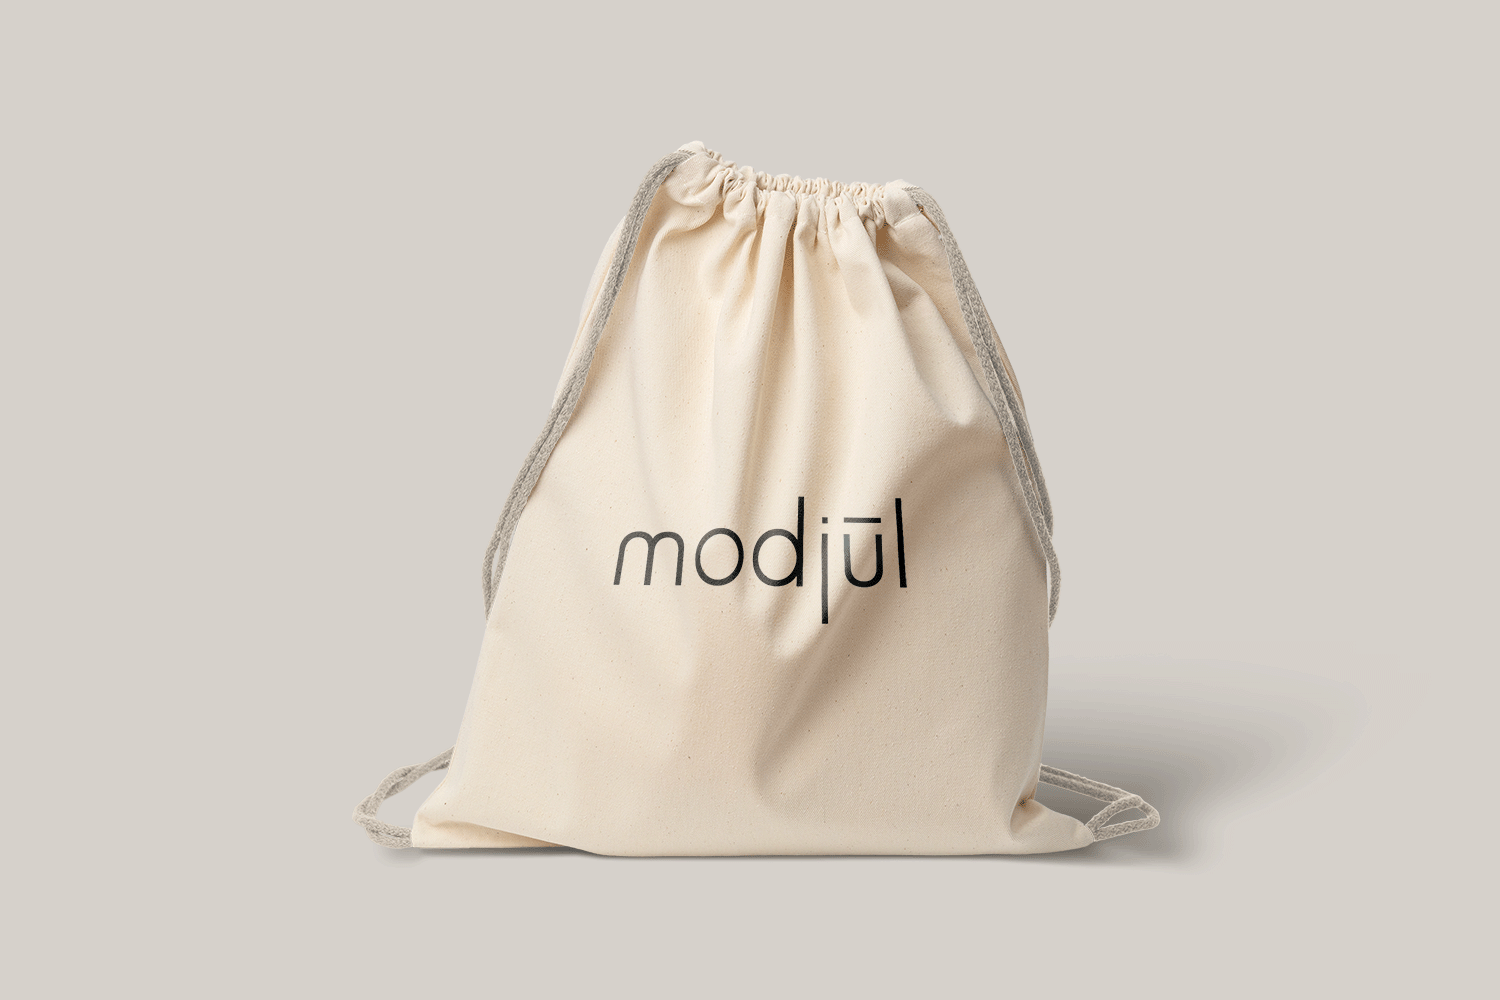 A mockup of the muslin bags used for storing the leather bags designed by modjūl.